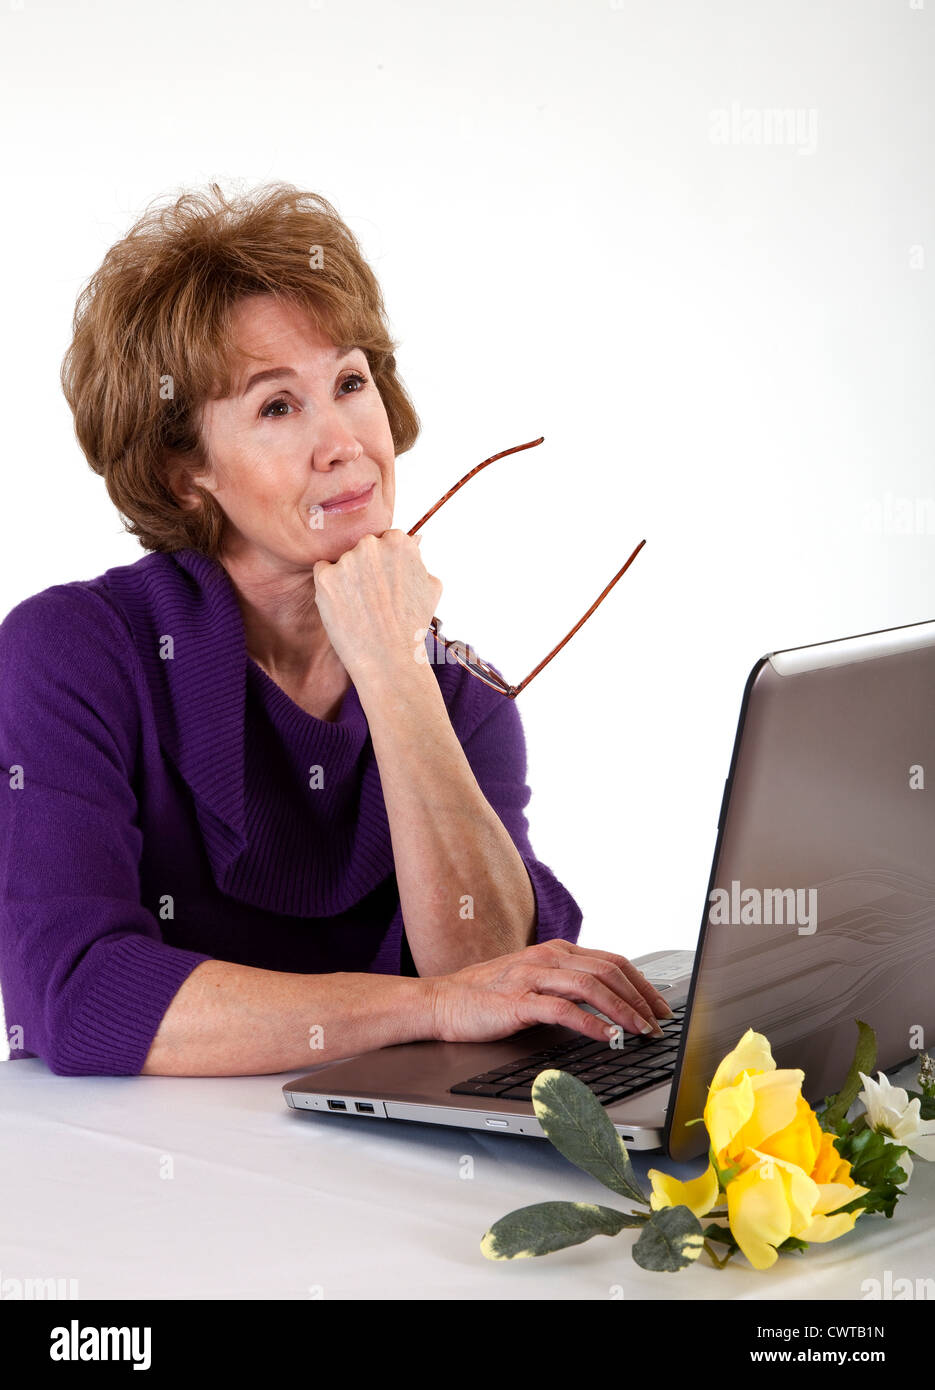 A mature woman sitting in front of her laptop computer with a dreamy sort of expression on her face. Stock Photo